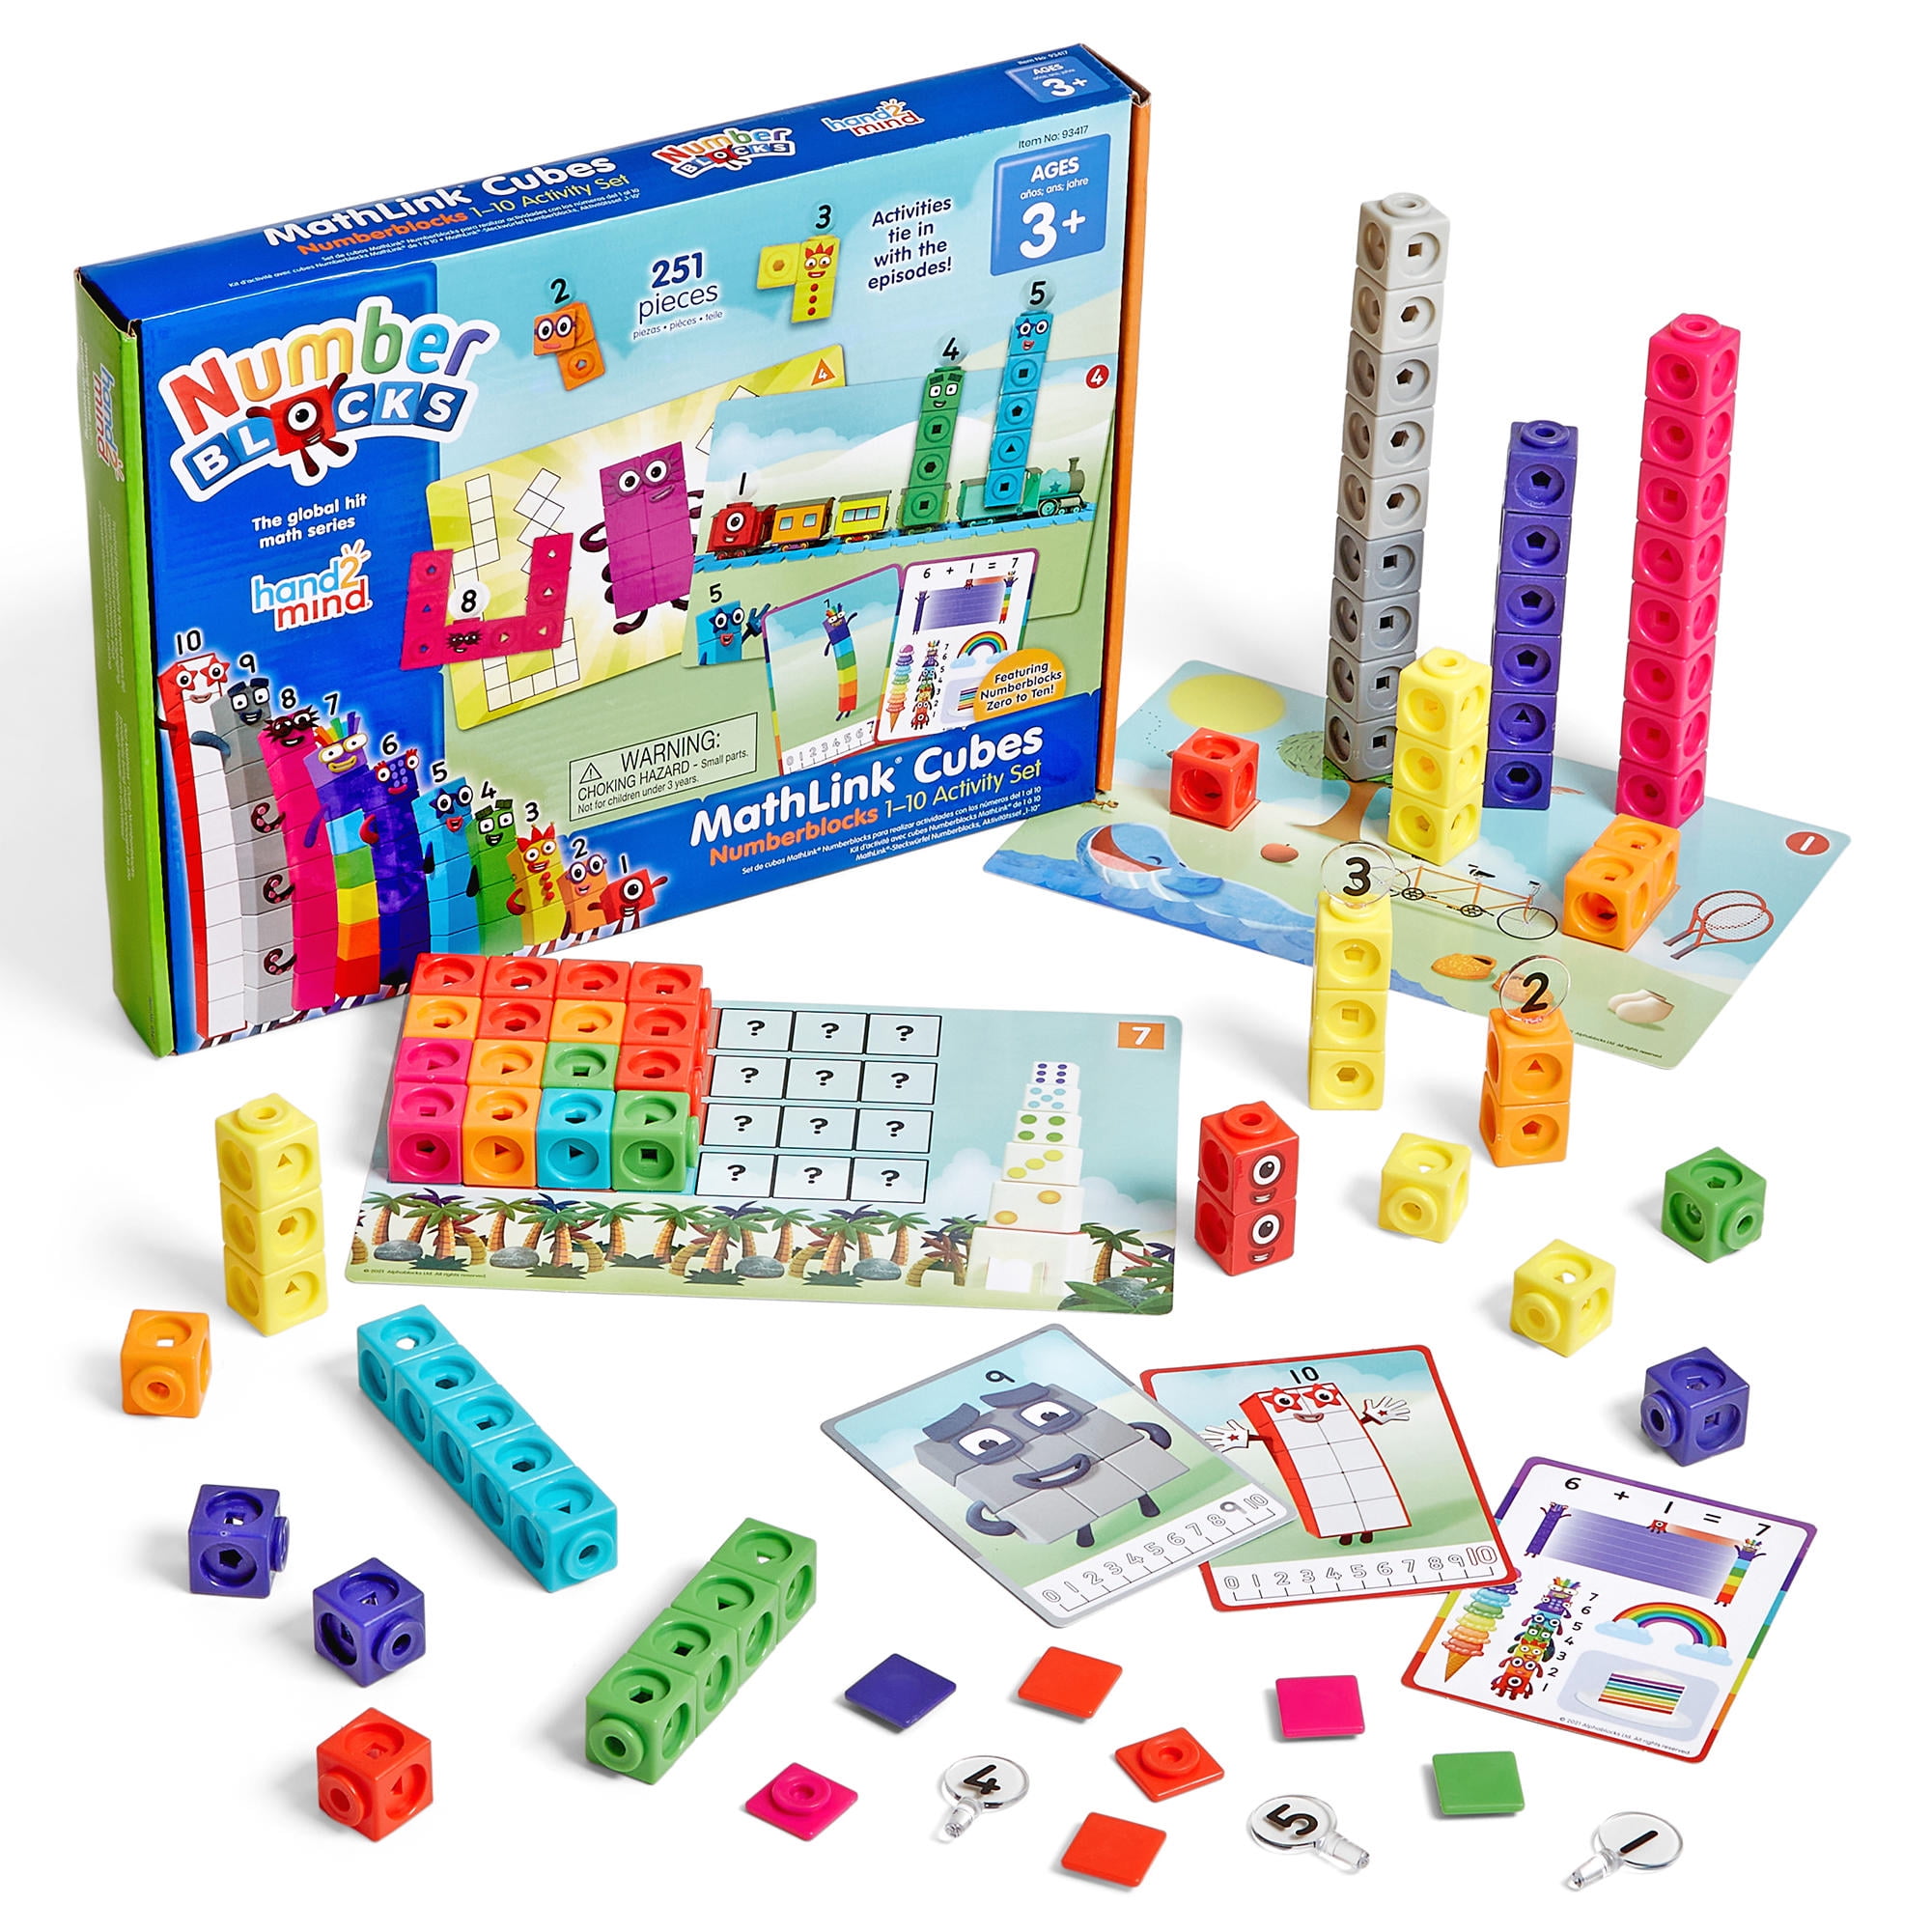 Learning Resources Mathlink Cubes Educational Counting Toy Set of 100 Cubes 